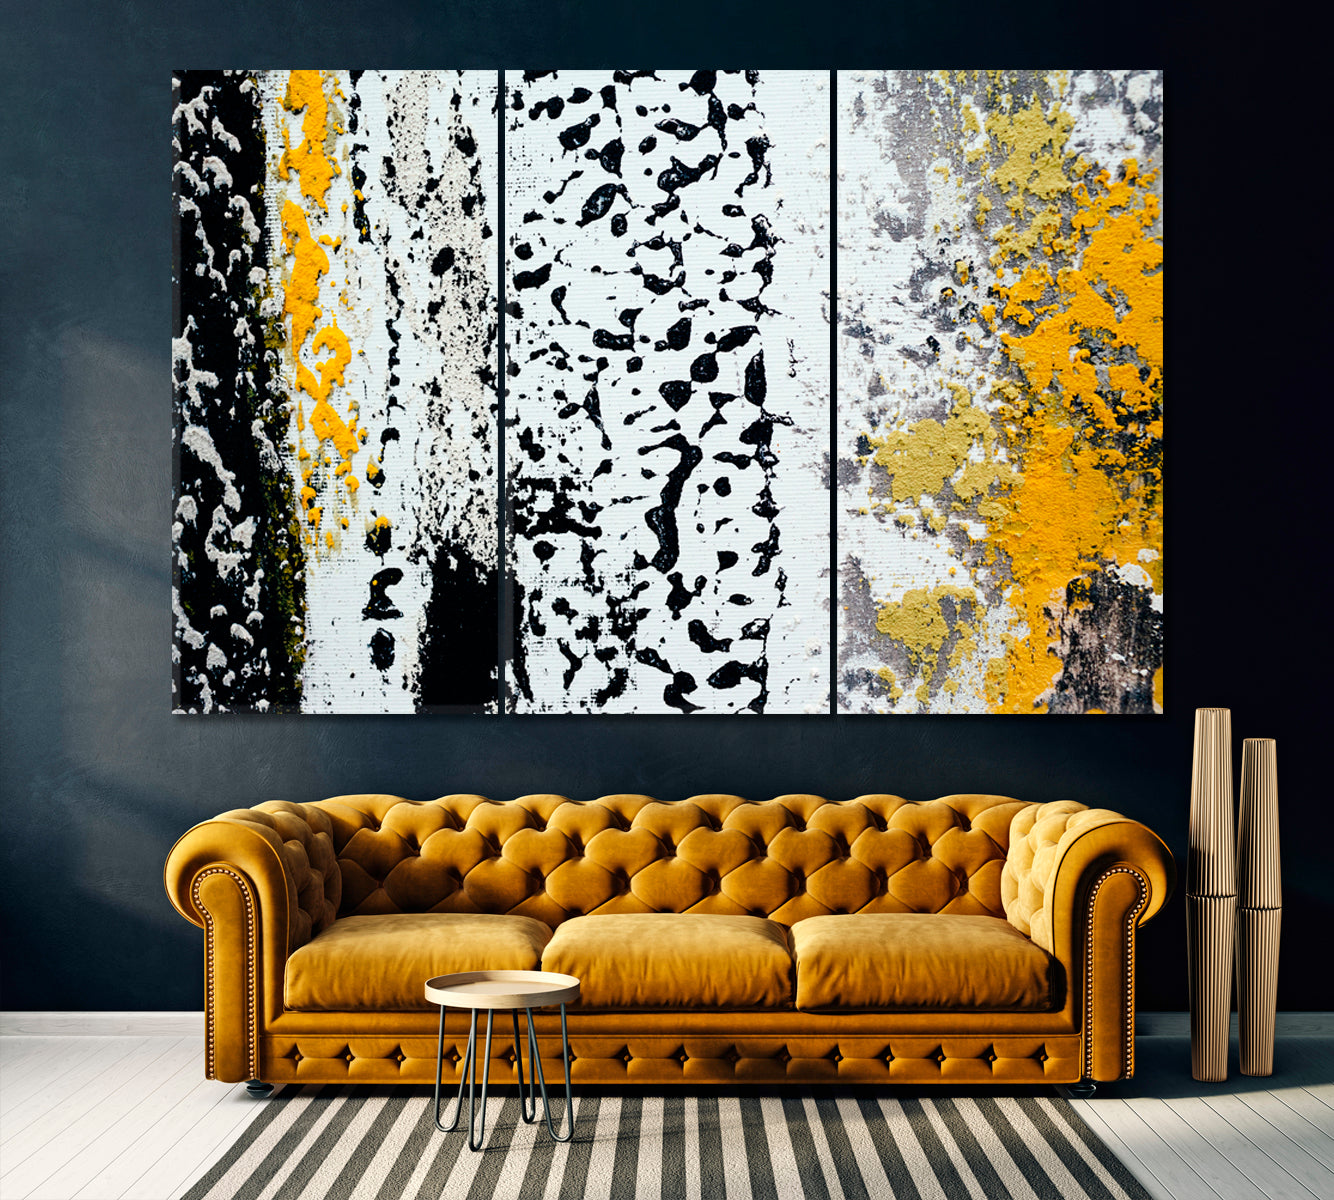 Abstract Black Splashes Canvas Print ArtLexy 3 Panels 36"x24" inches 